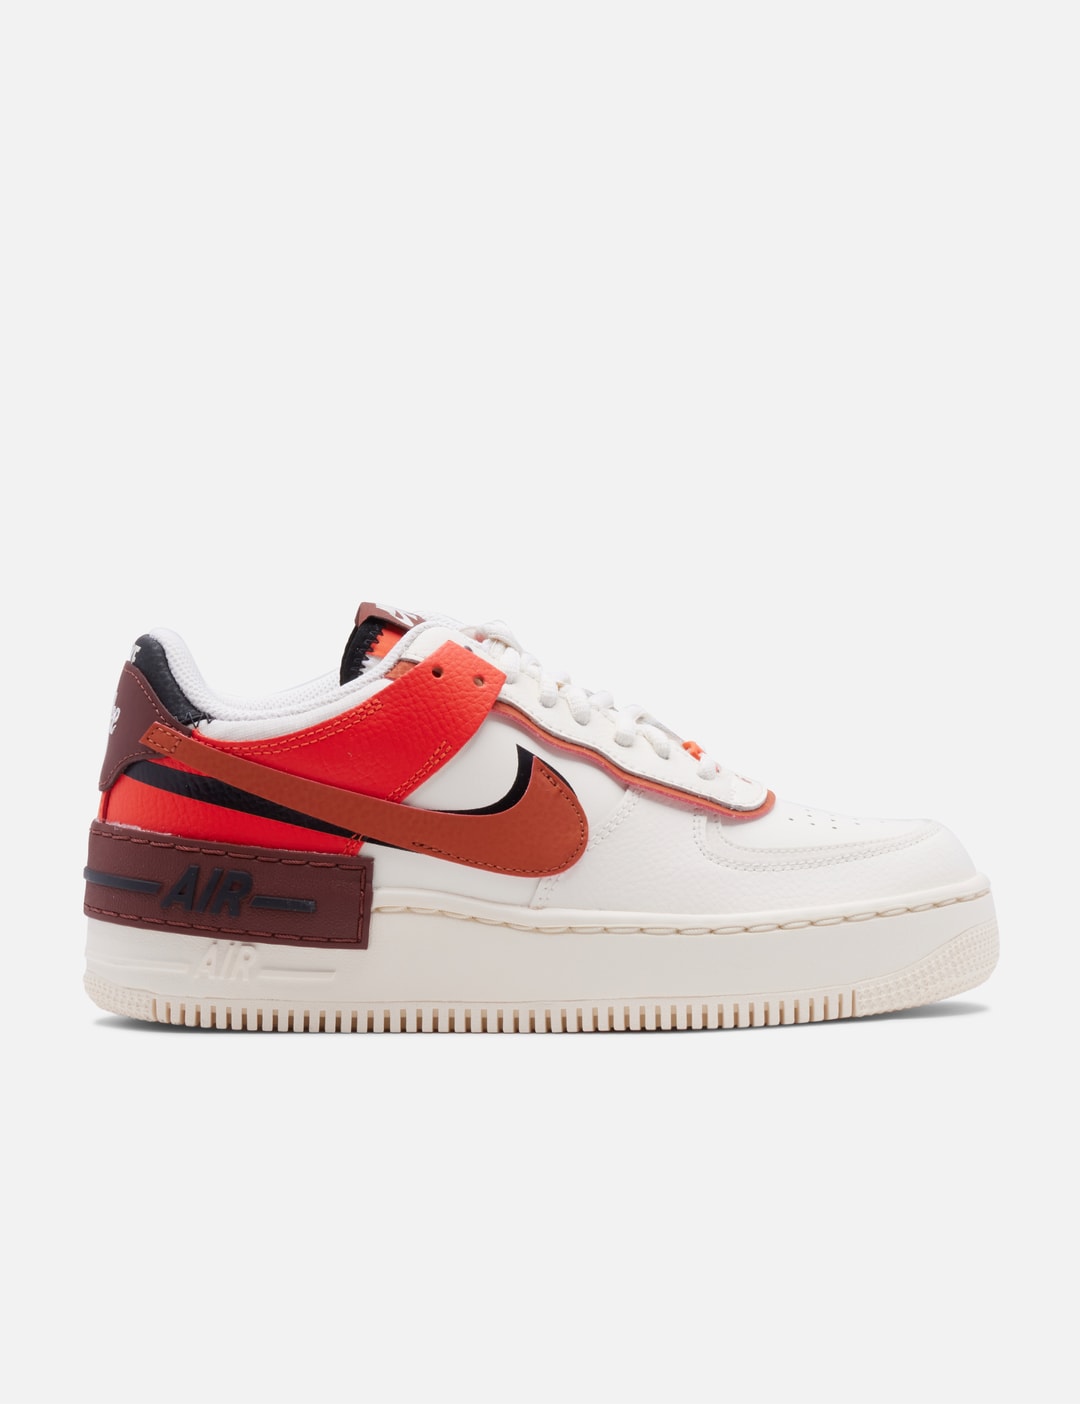 Beeldhouwer produceren schrijven Nike - Nike Air Force 1 Shadow | HBX - Globally Curated Fashion and  Lifestyle by Hypebeast